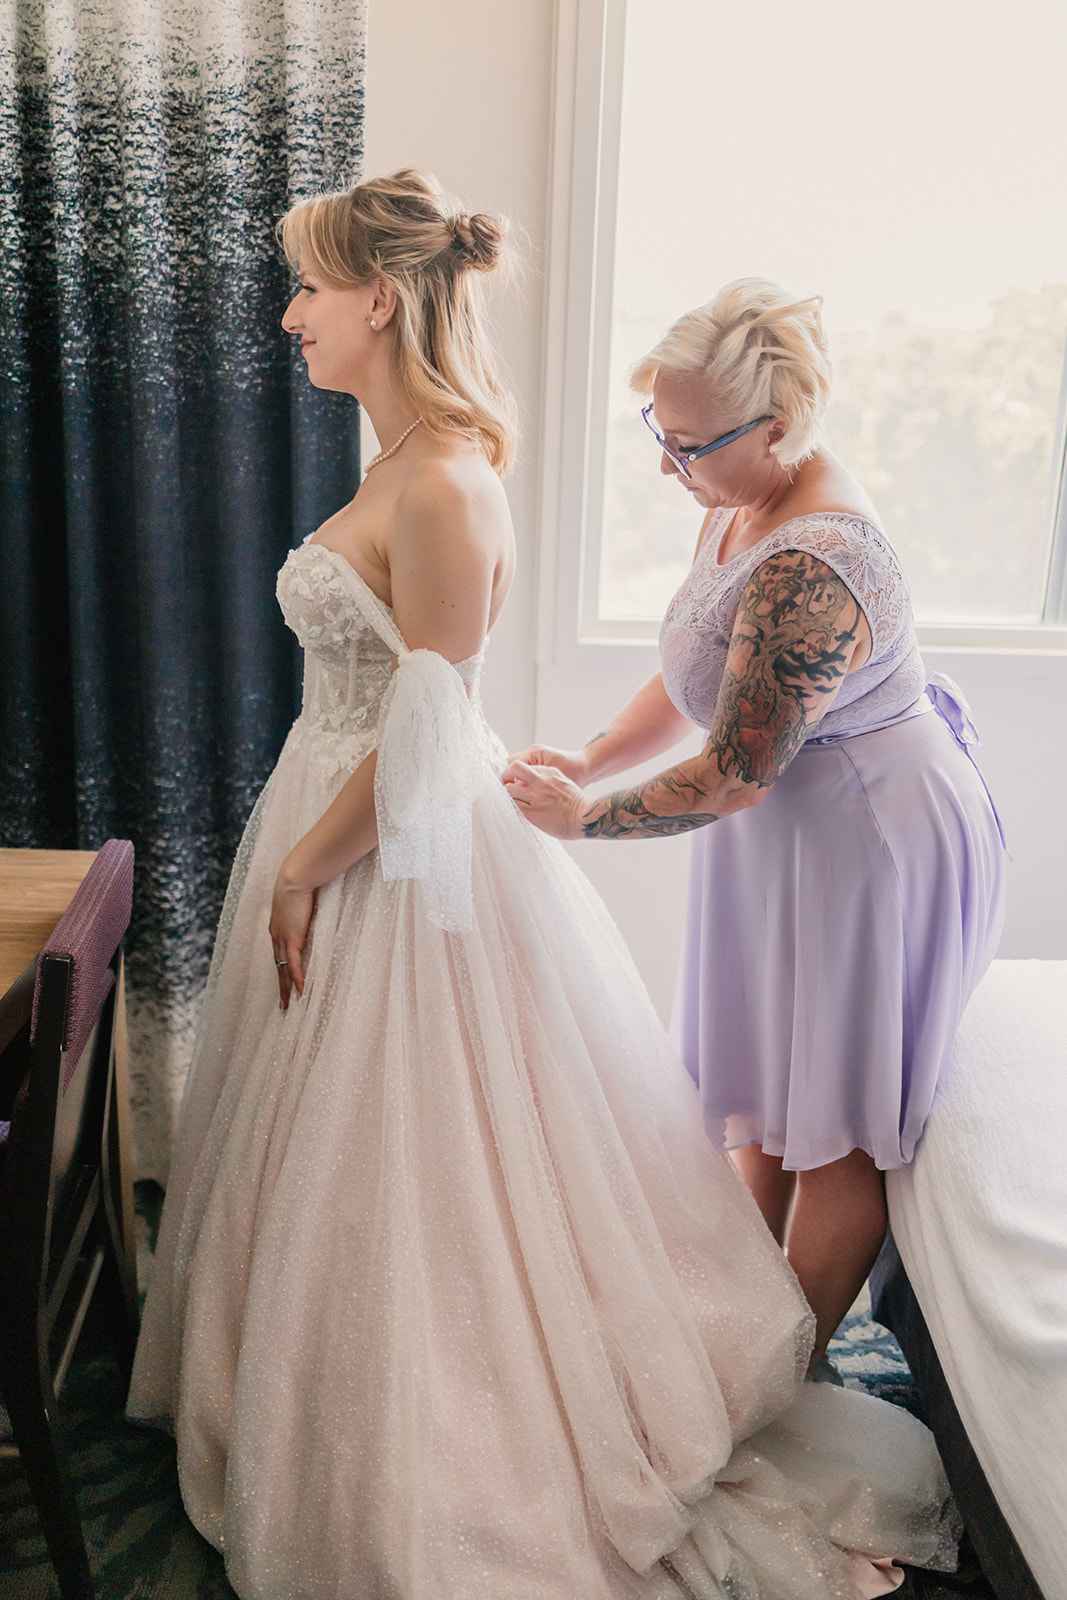 A woman in a wedding dress stands as another woman in a lavender dress adjusts the back of the gown.